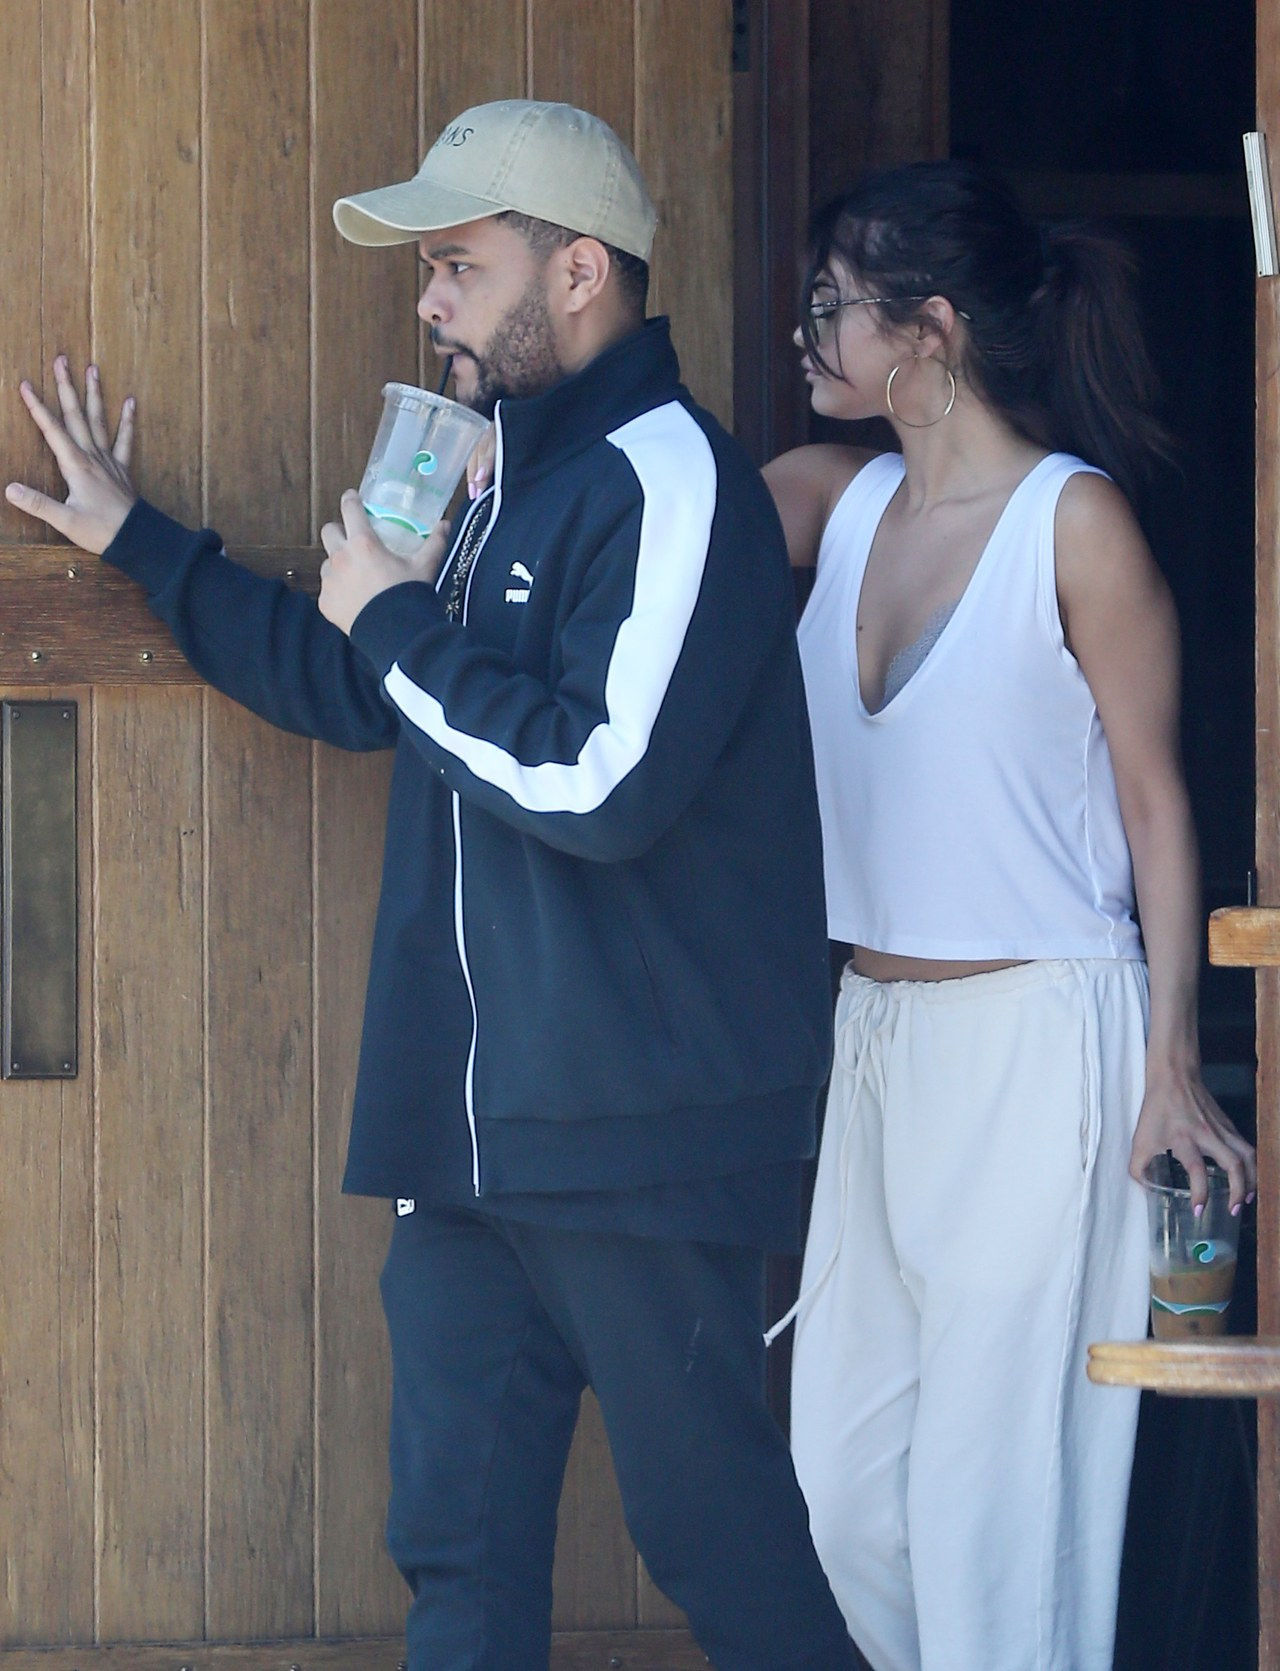 Selena Gomez and boyfriend The Weeknd celebrate Selena's birthday 25th with a lunch date in Los Angeles